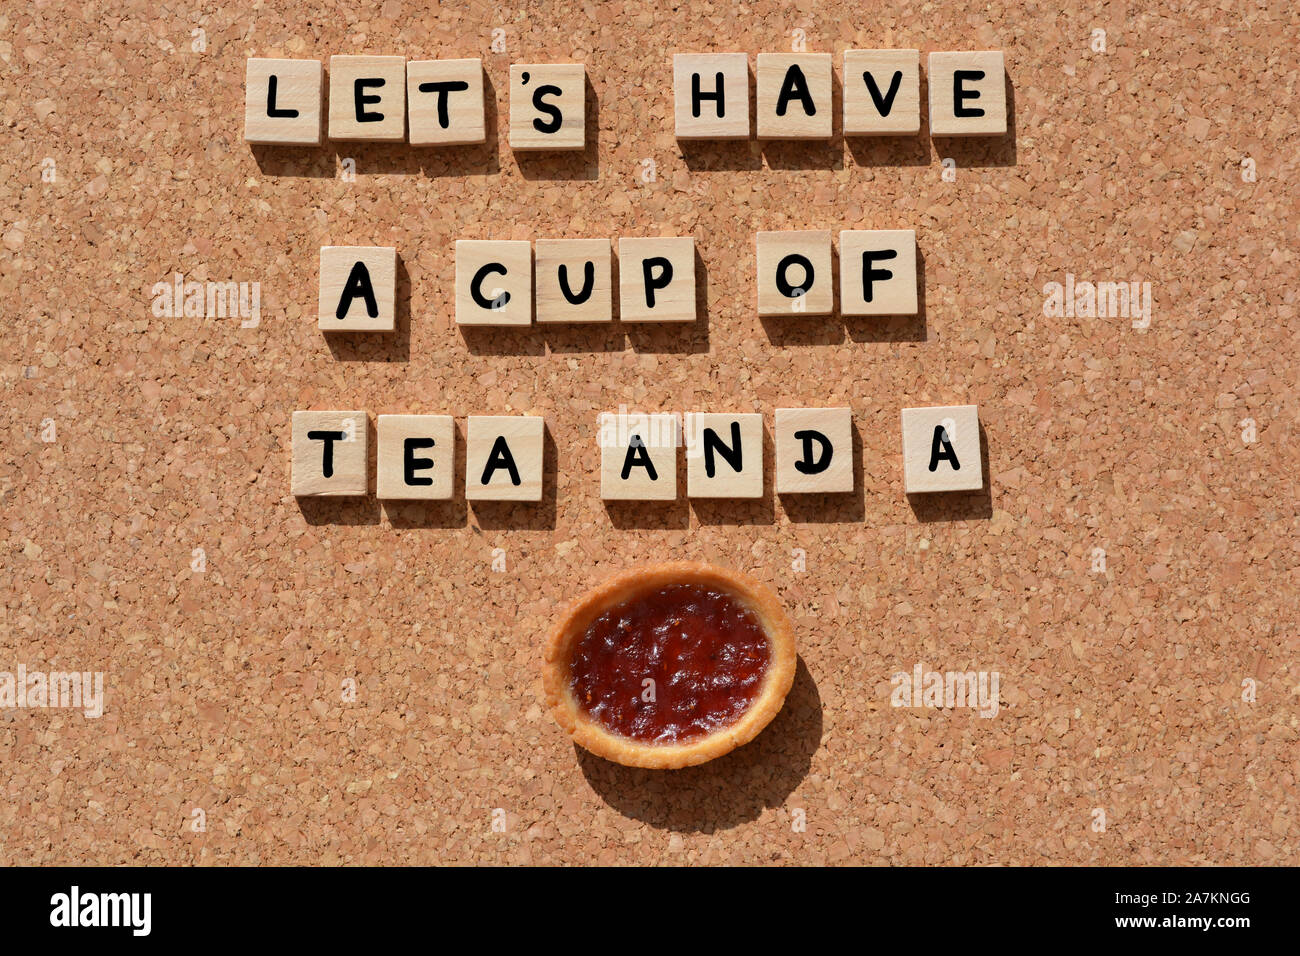 Lets Have A Cup of Tea And A jam tart, words in 3d wooden alphabet letters on a cork board background Stock Photo